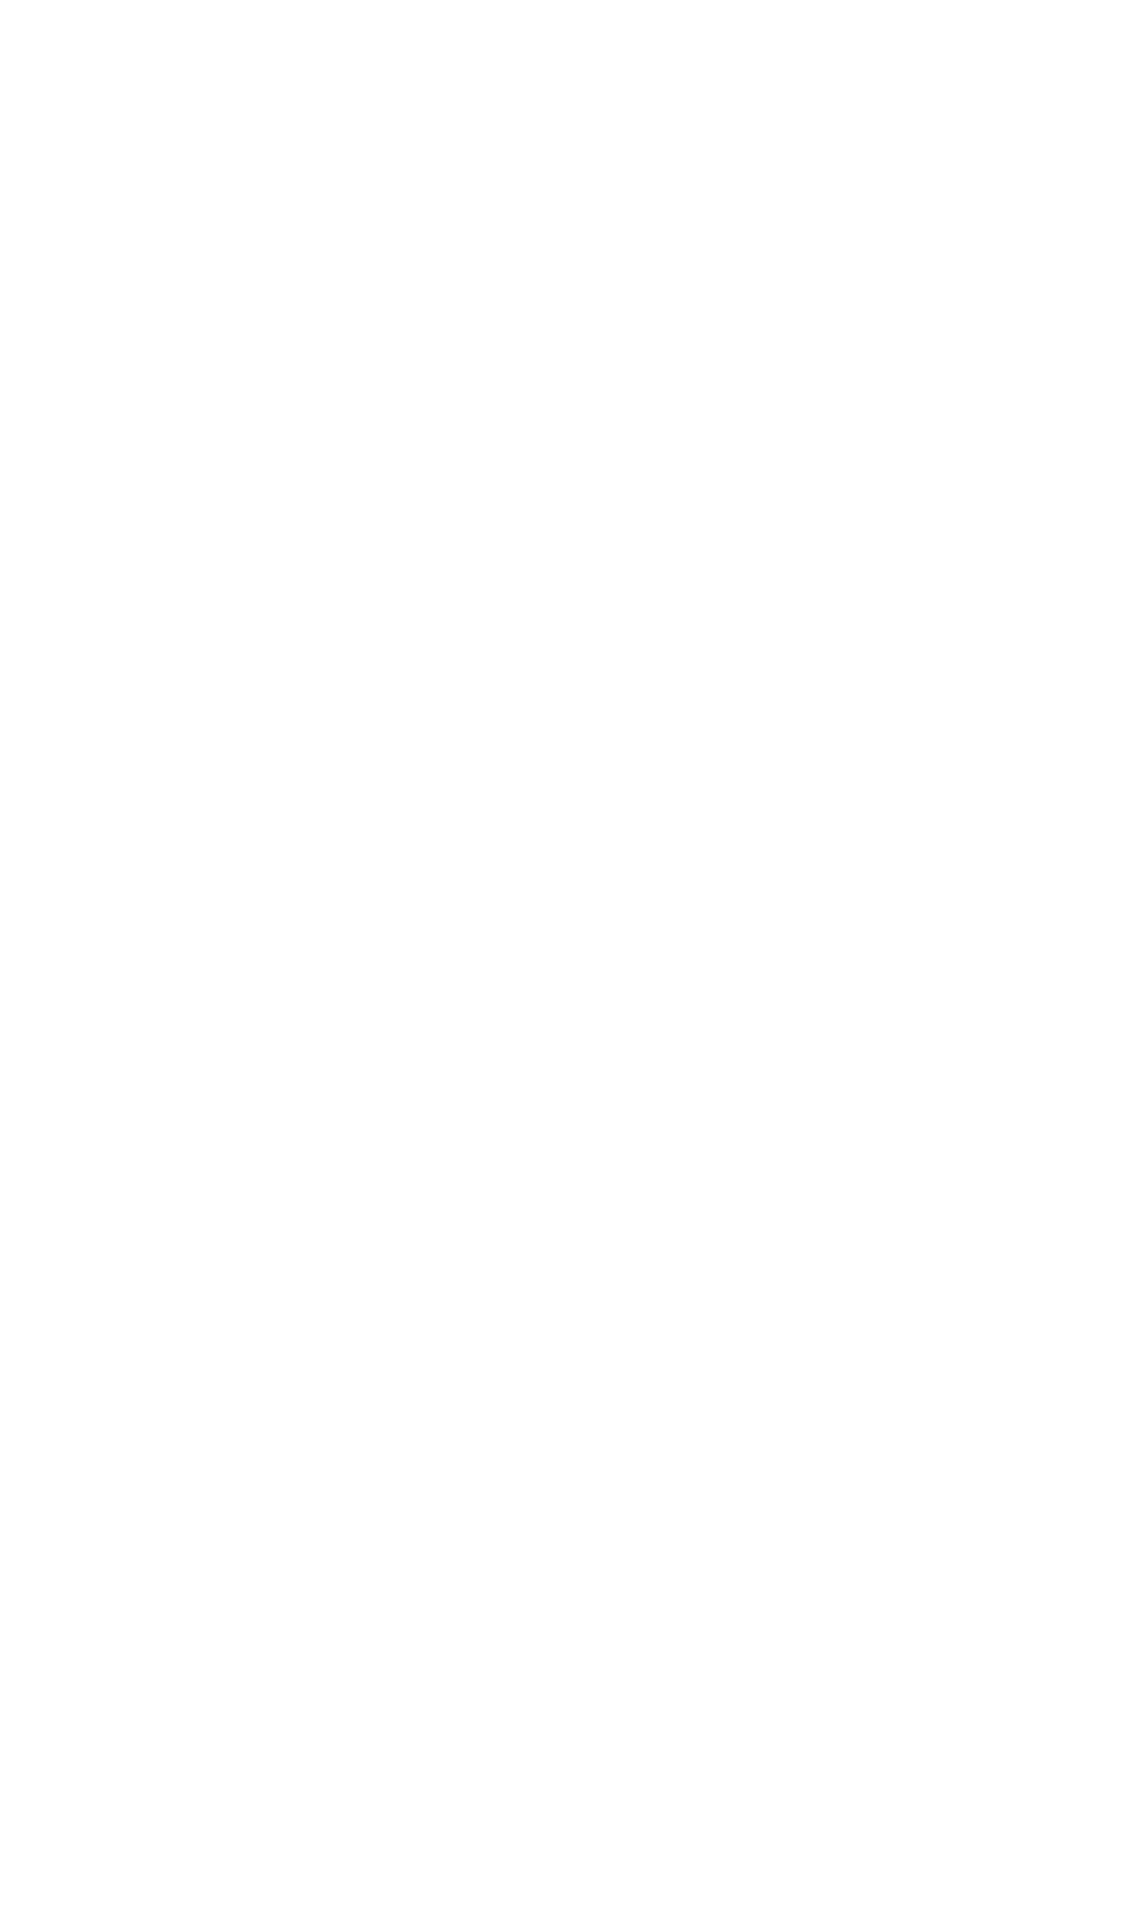 STAGE